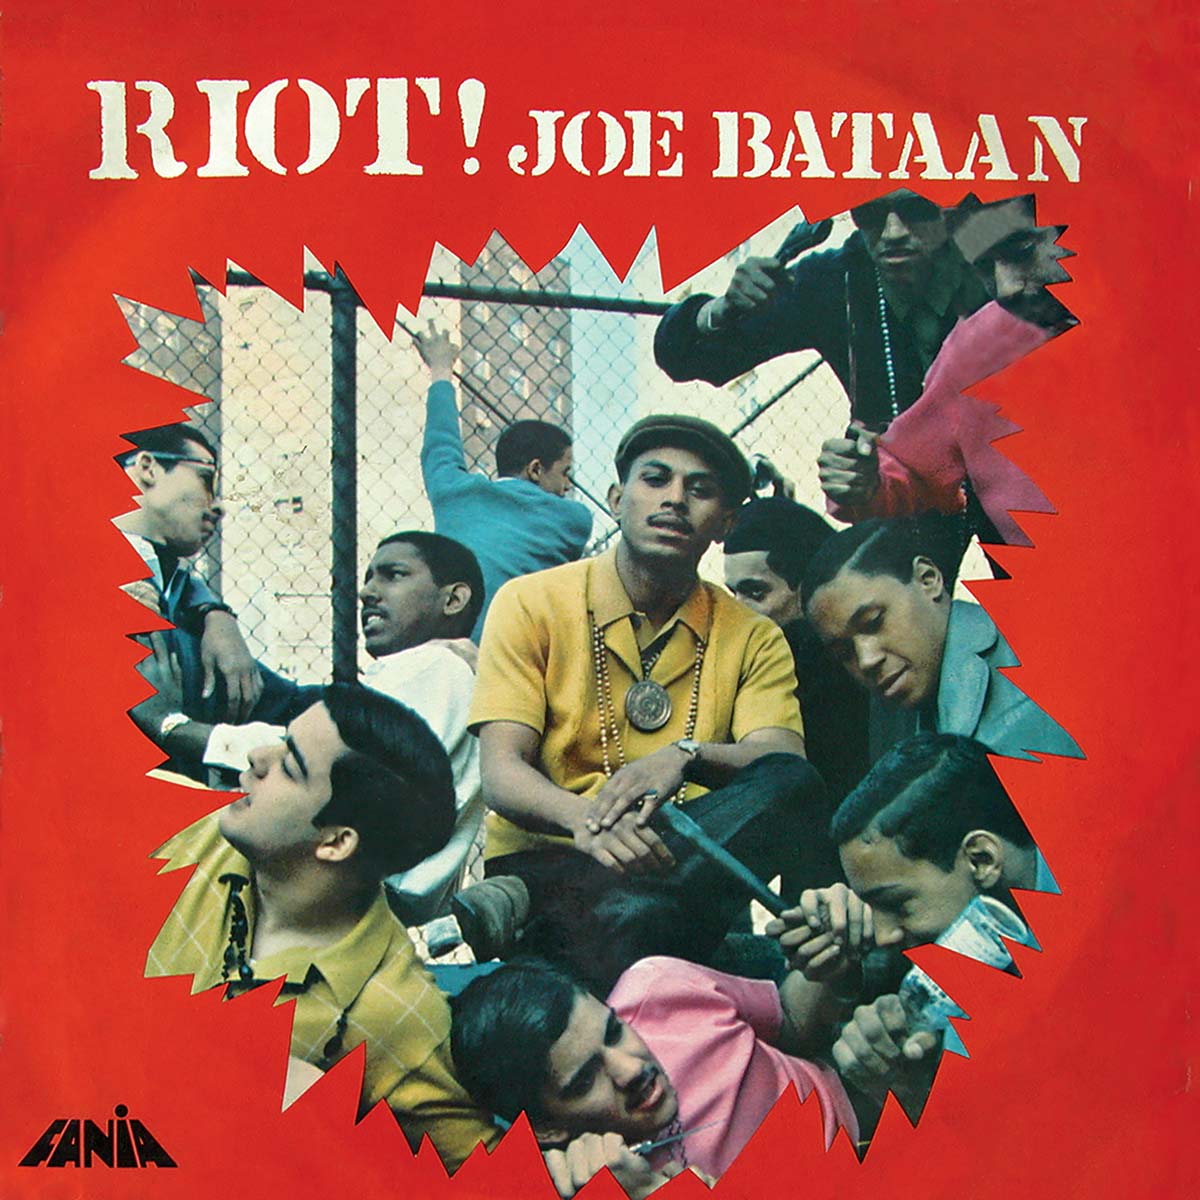 Featured Image for “RIOT!”